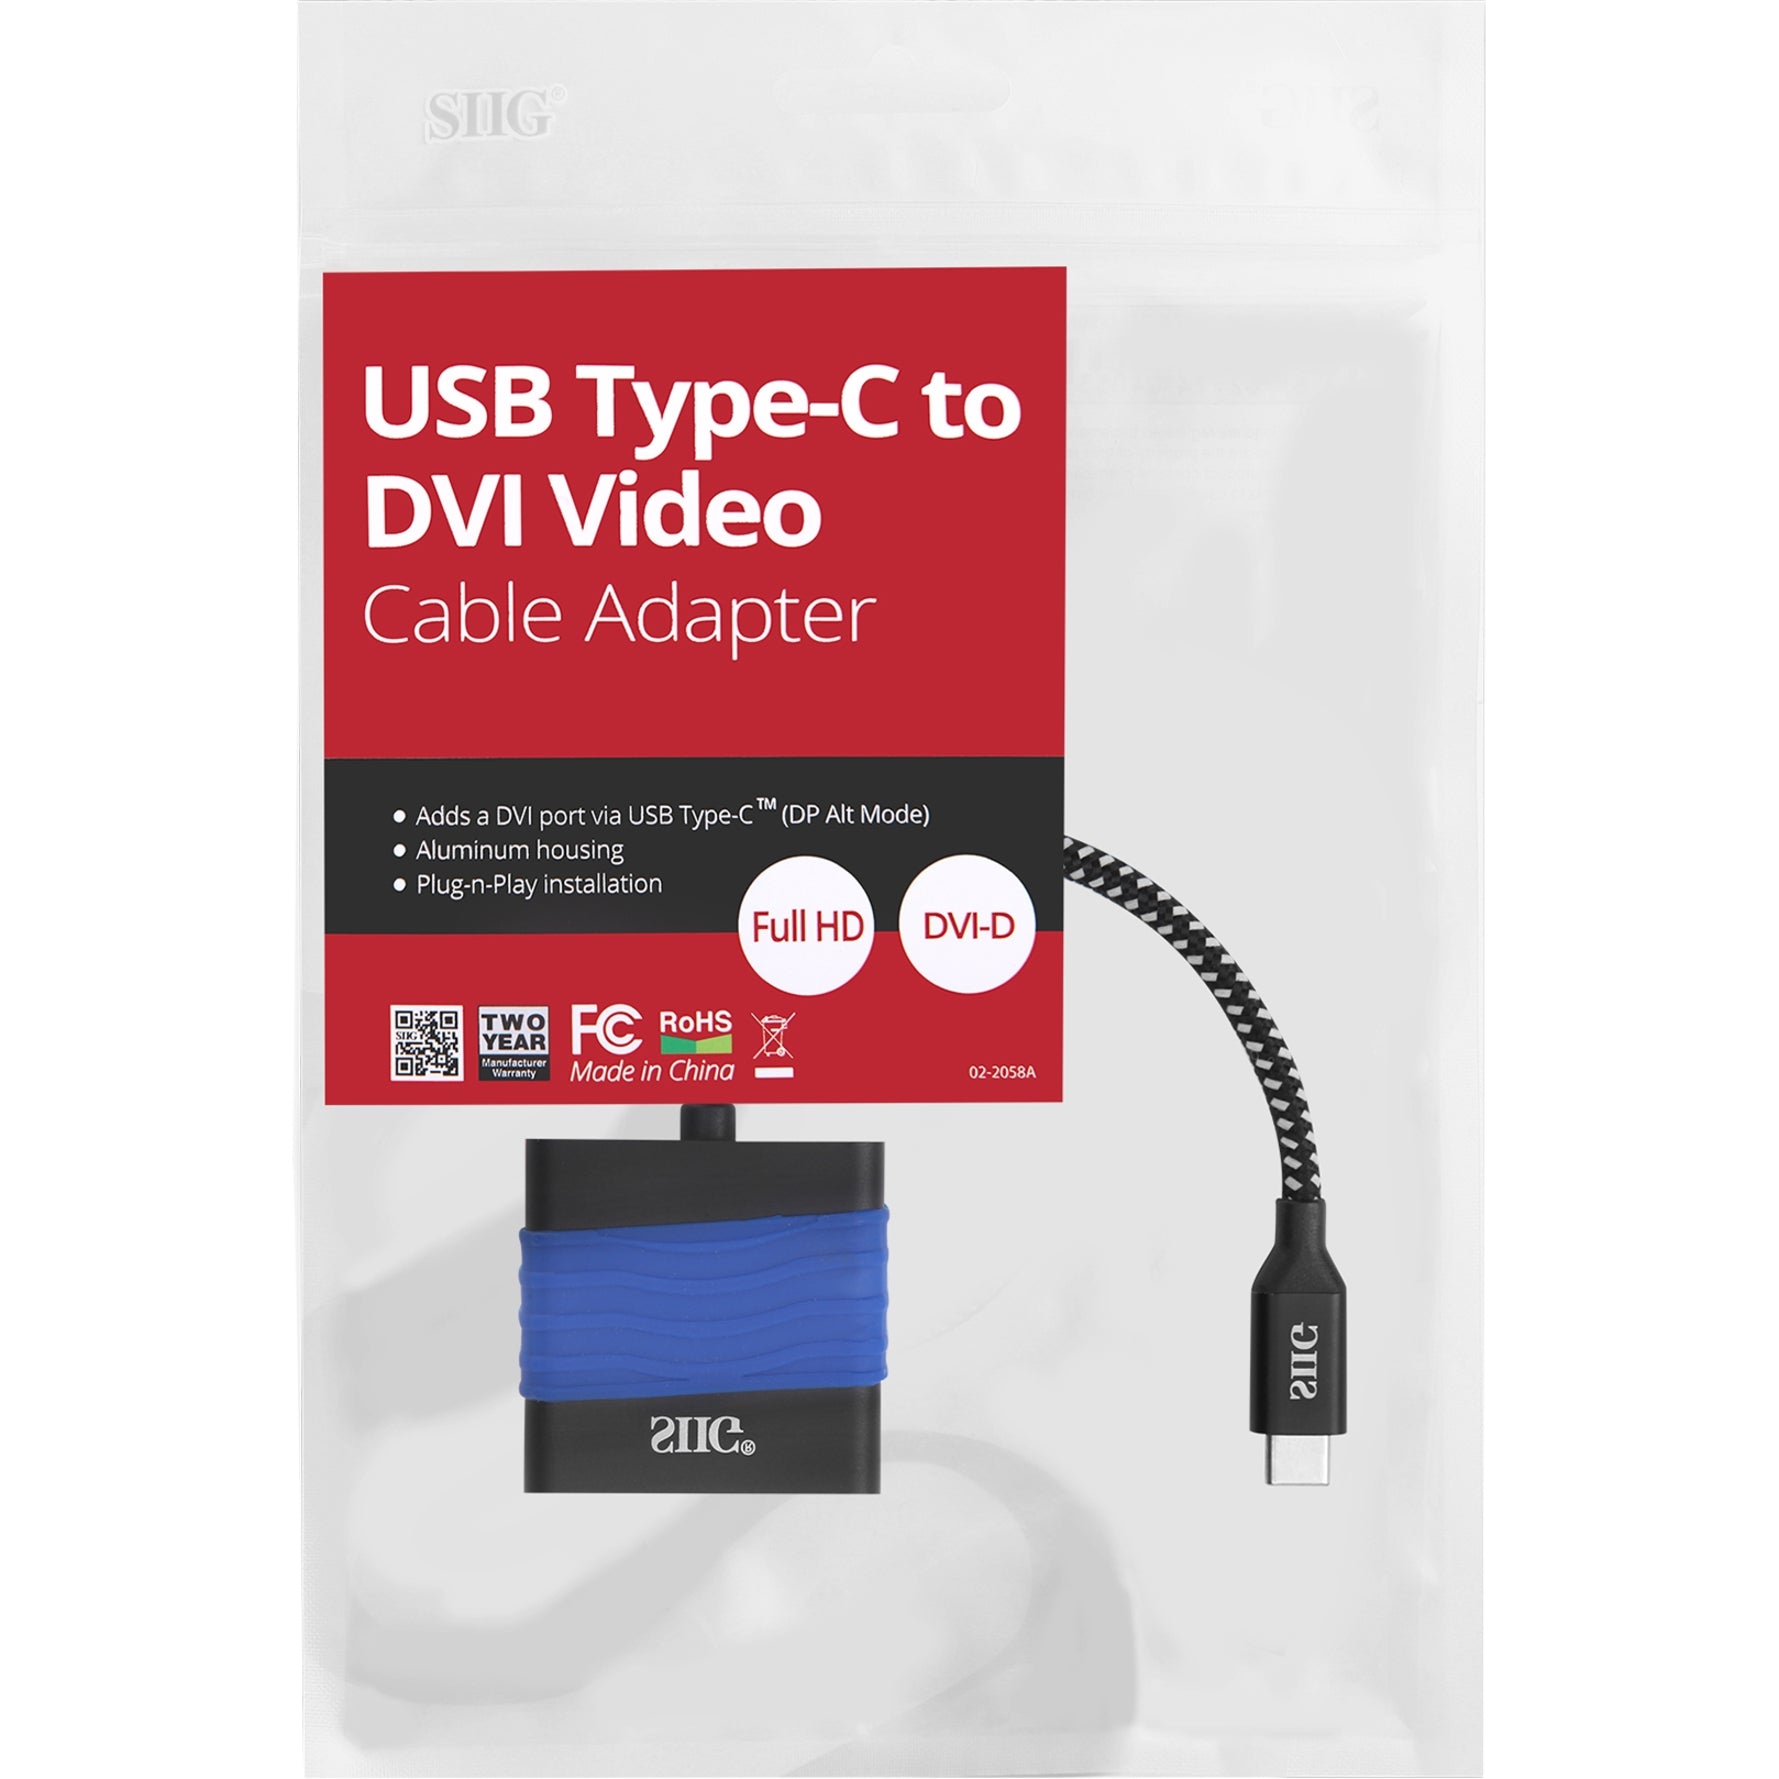 SIIG CB-TC0711-S1 USB Type-C to DVI Video Cable Adapter, Connect Your USB-C Device to a DVI Monitor